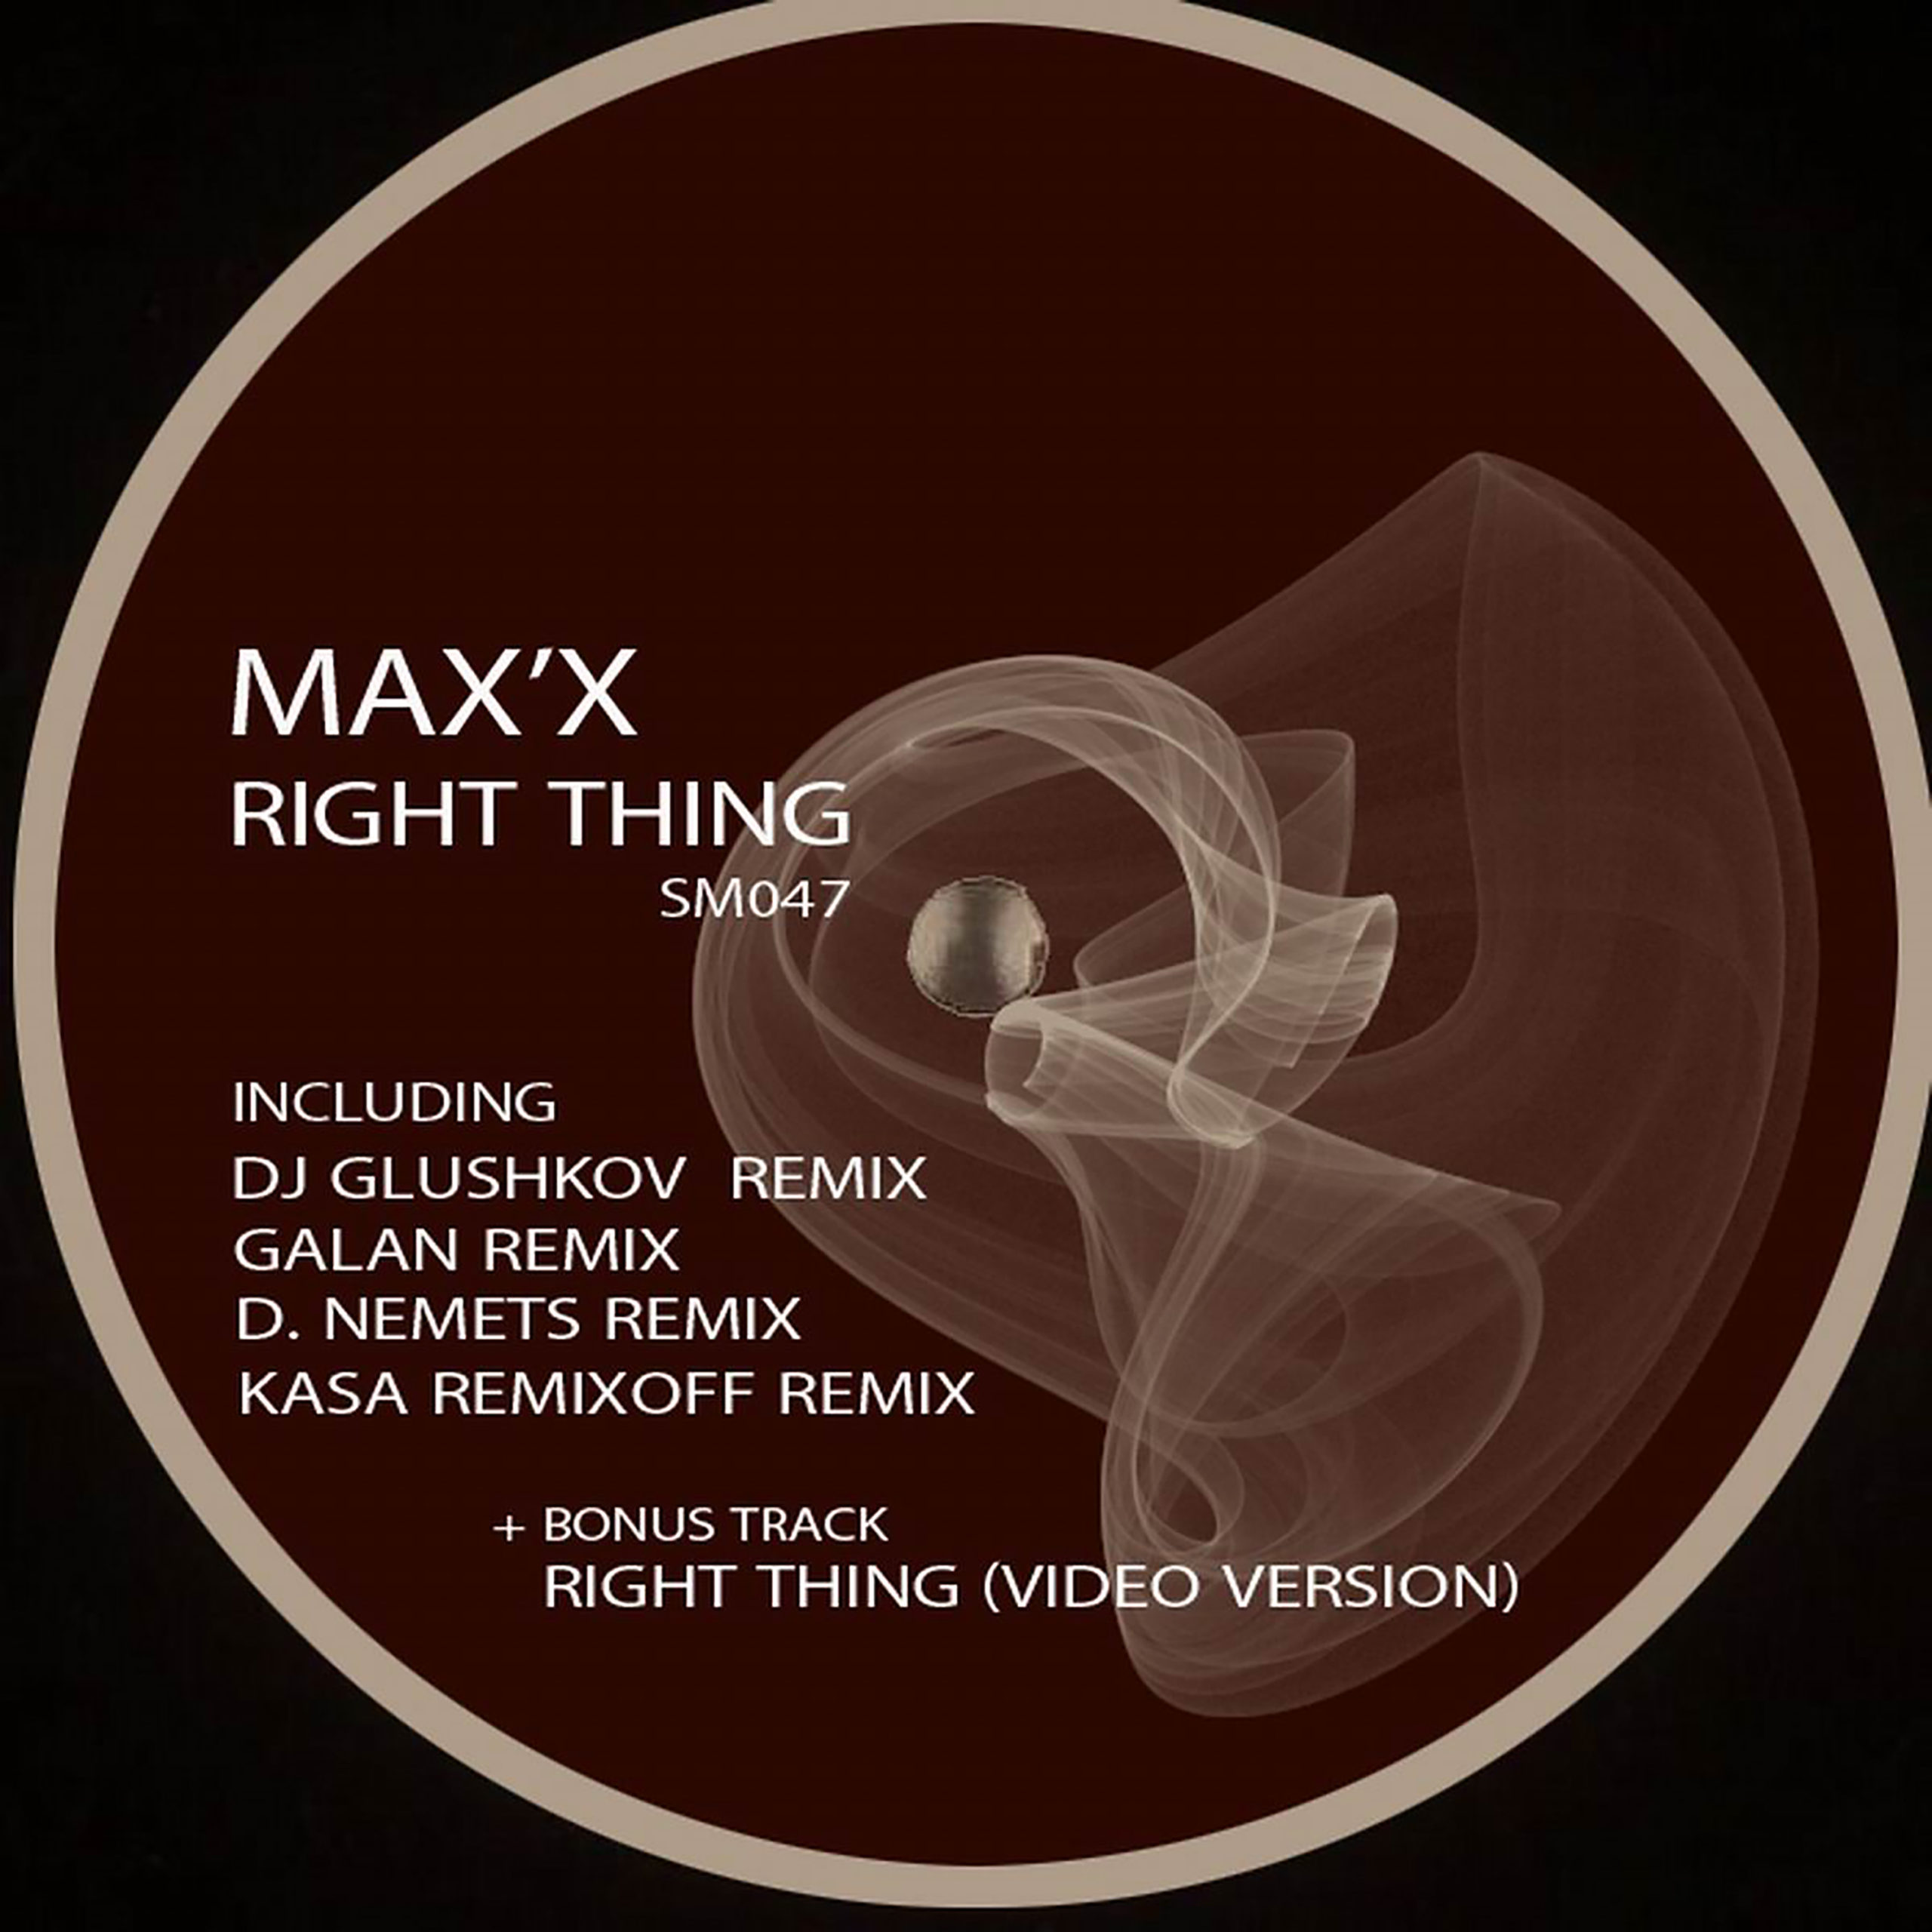 Max'x - Right thing